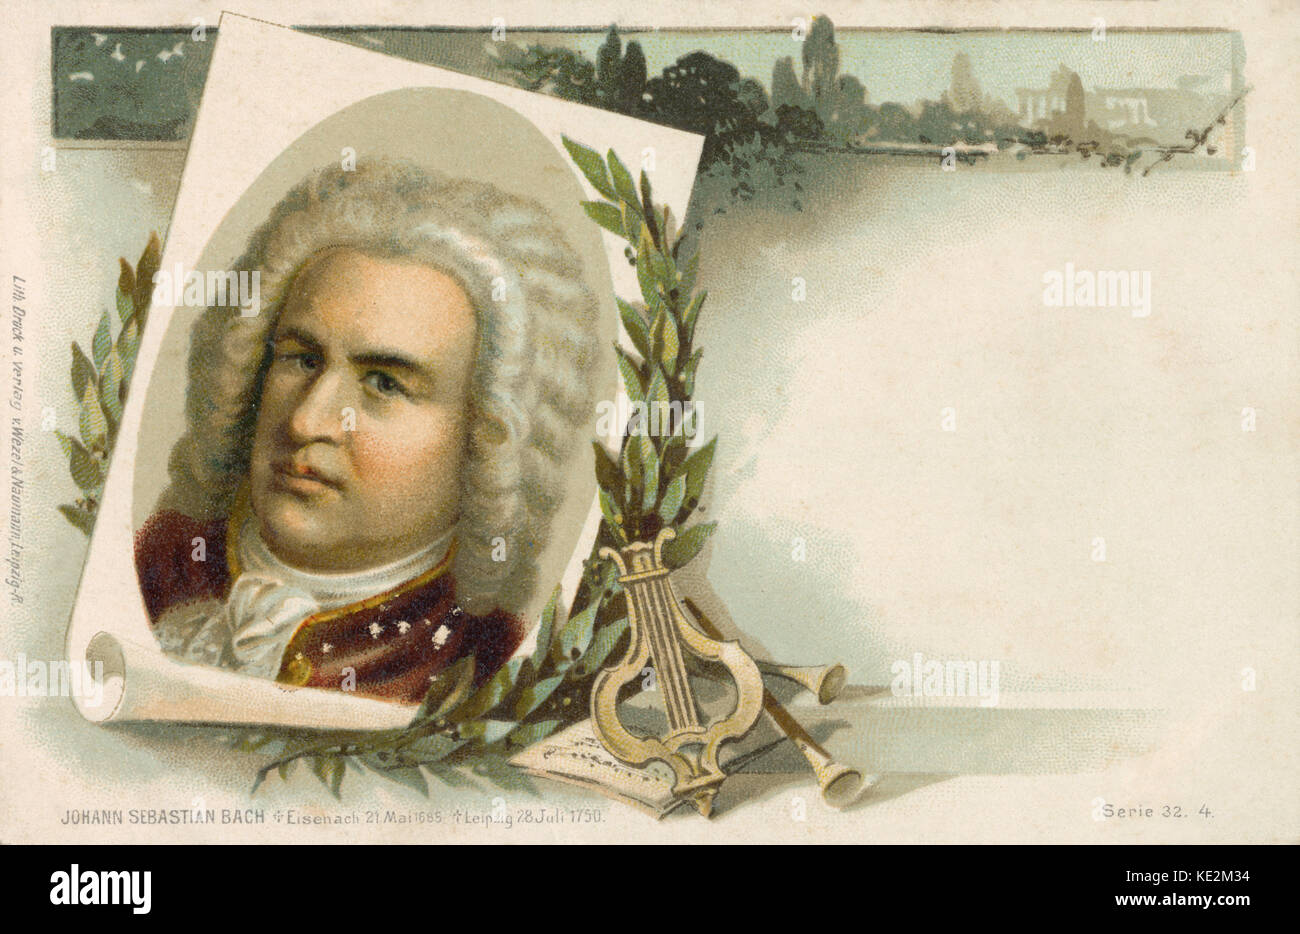 Johann Sebastian Bach - German composer and organist. Illustration on postcard with laurel wreath, instruments and score 21 March 1685 - 28 July 1750 Stock Photo